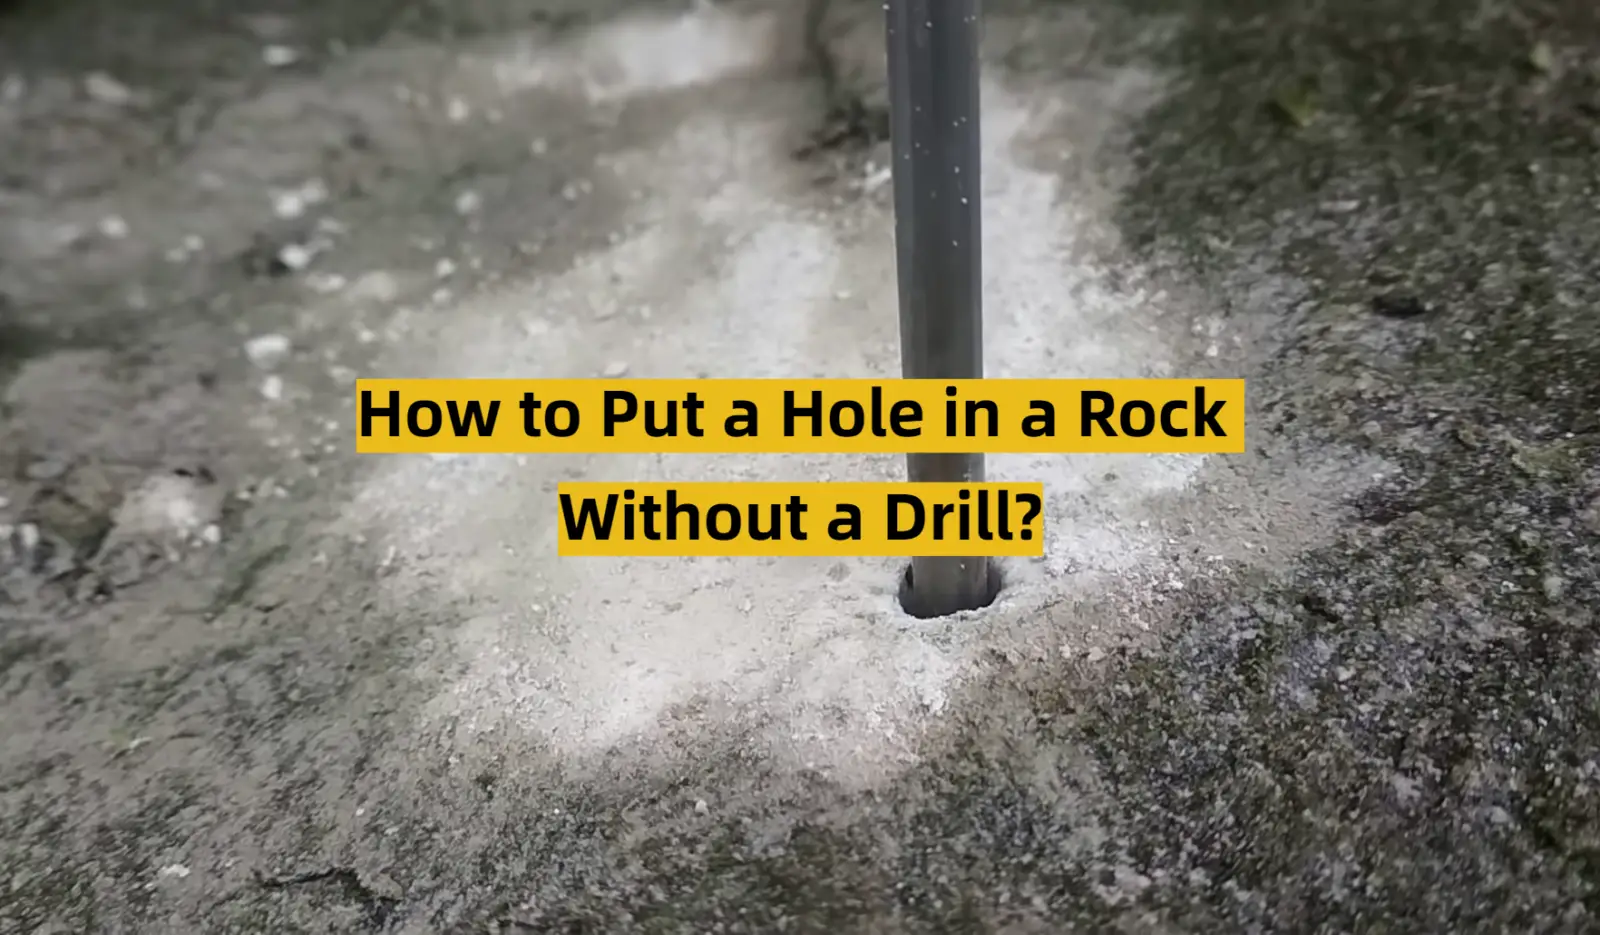 How to Put a Hole in a Rock Without a Drill?